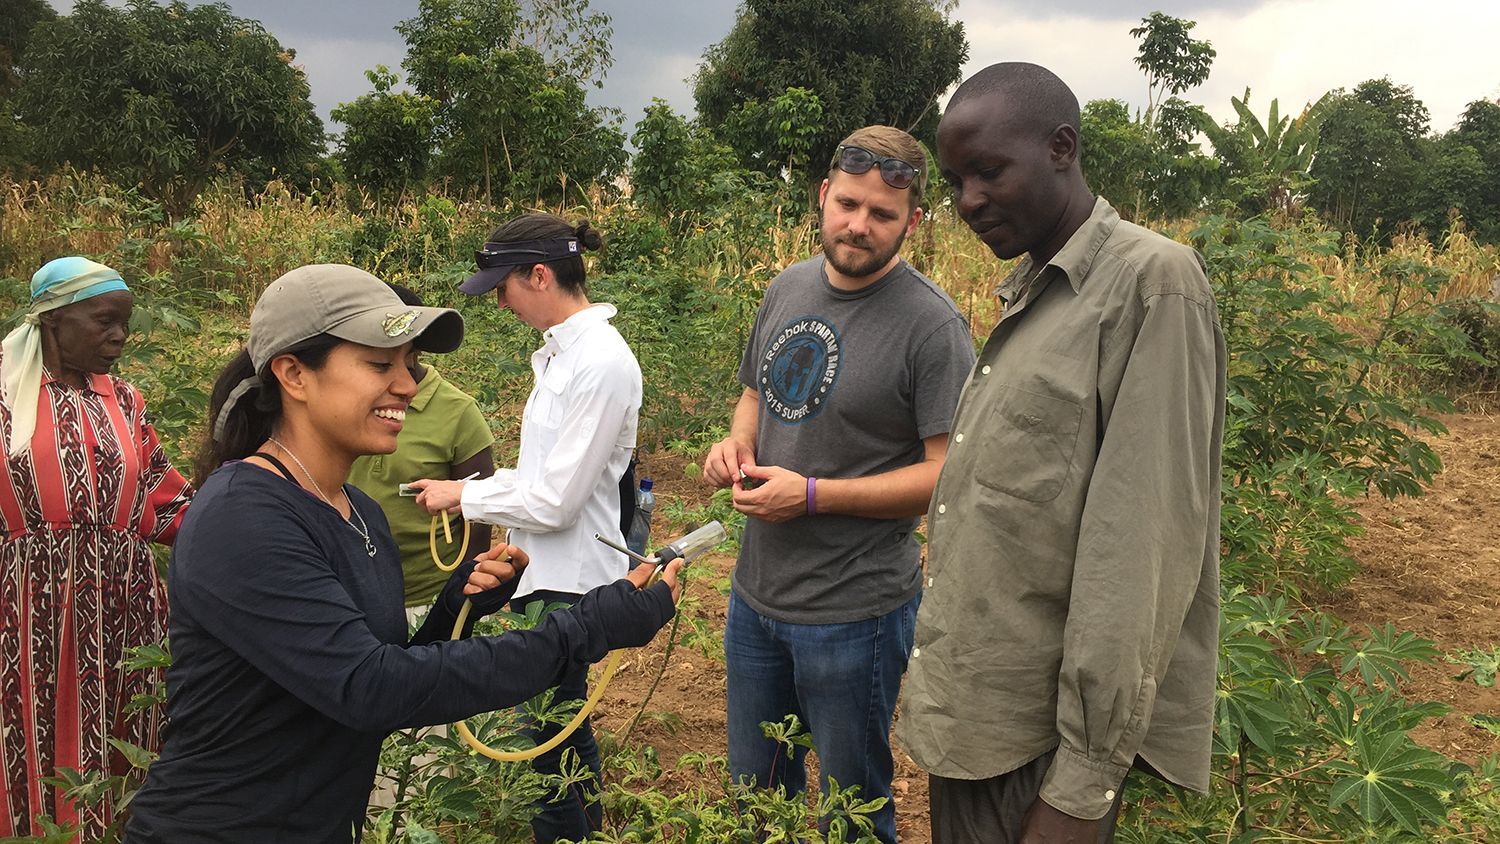 Gabriella Chavez (left) and William Sharpee (middle) talk with local cassava growers about how Cassava Mosaic Disease is transmitted.